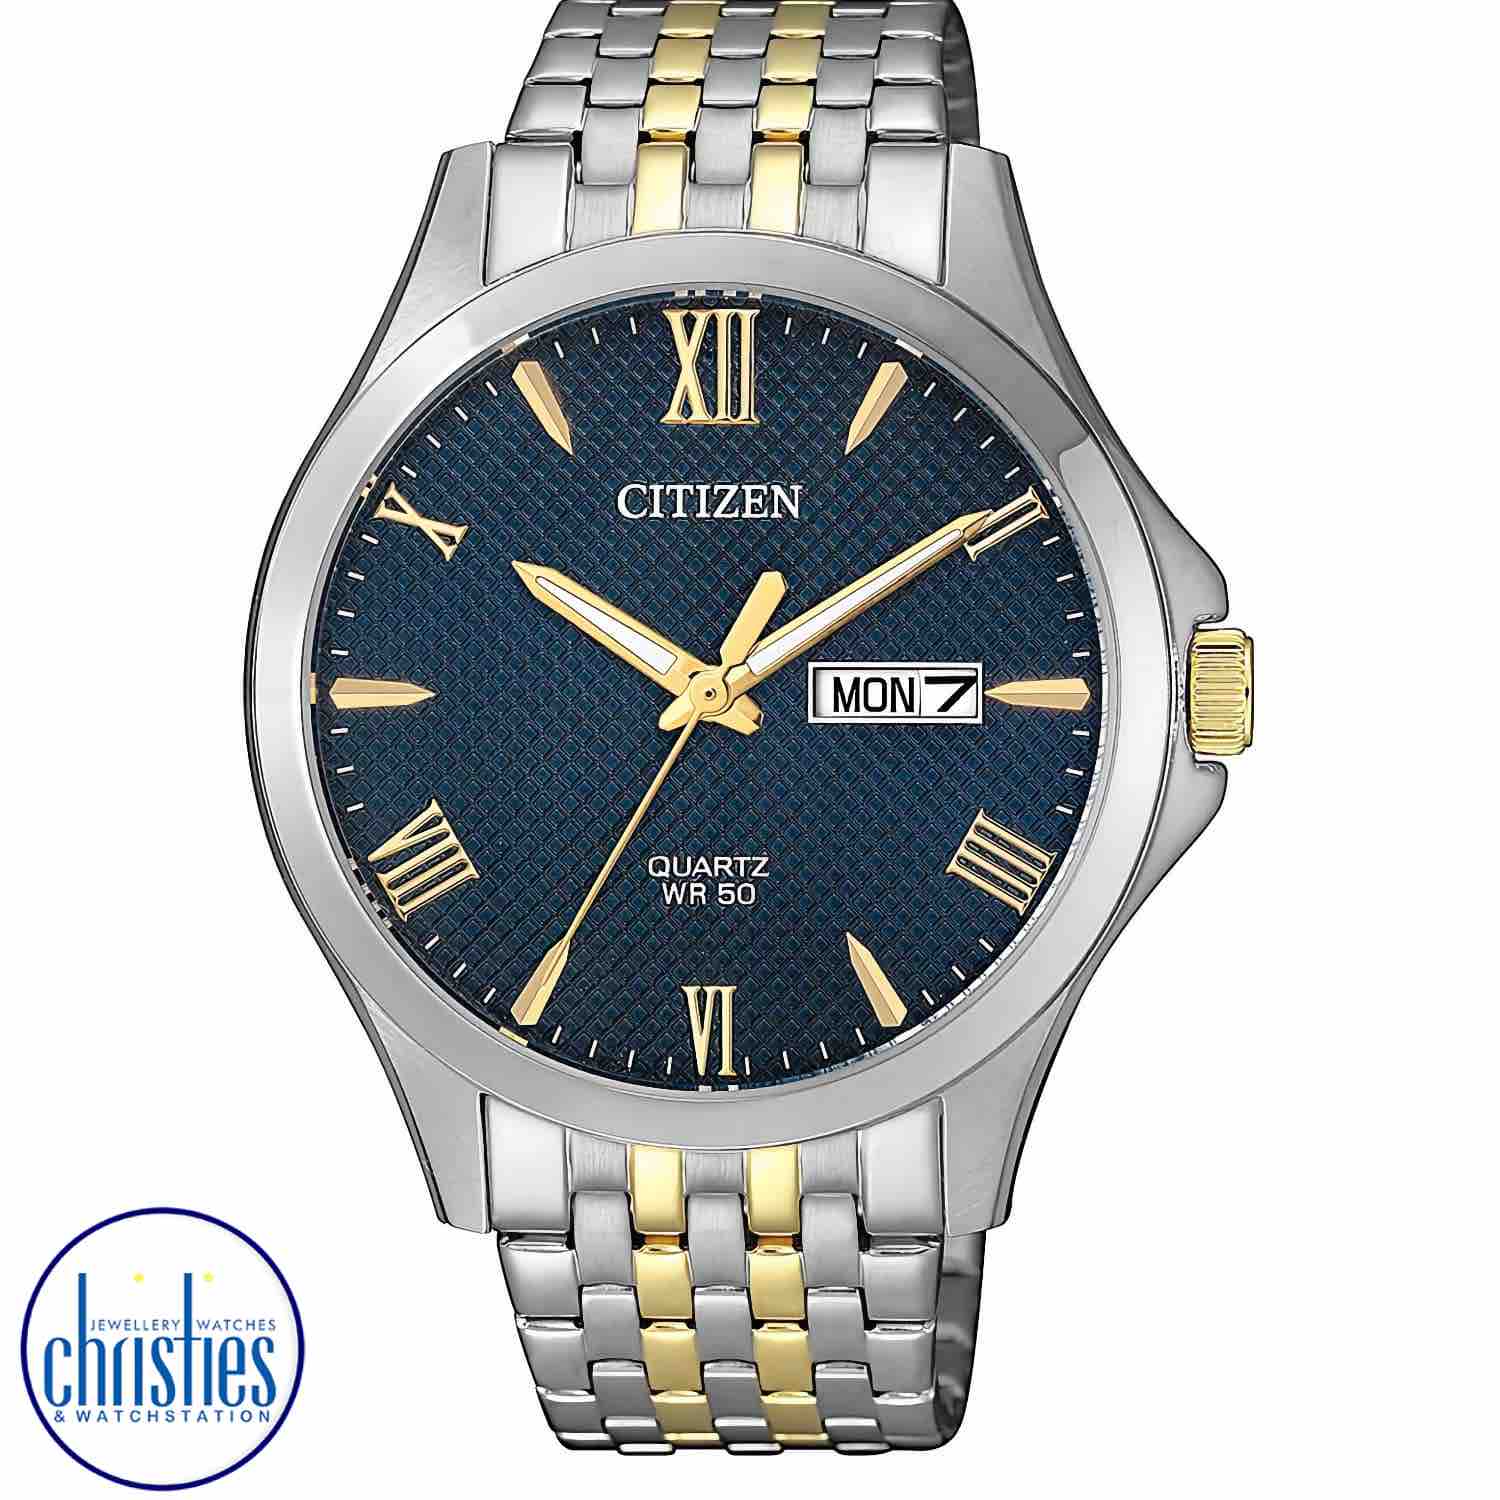 BF2024-50L CITIZEN Quartz Watch. With styled minimalism its signature, this watch from the Gents Dress Collection is designed to be a functionally effective timepiece for the modern man on the go.